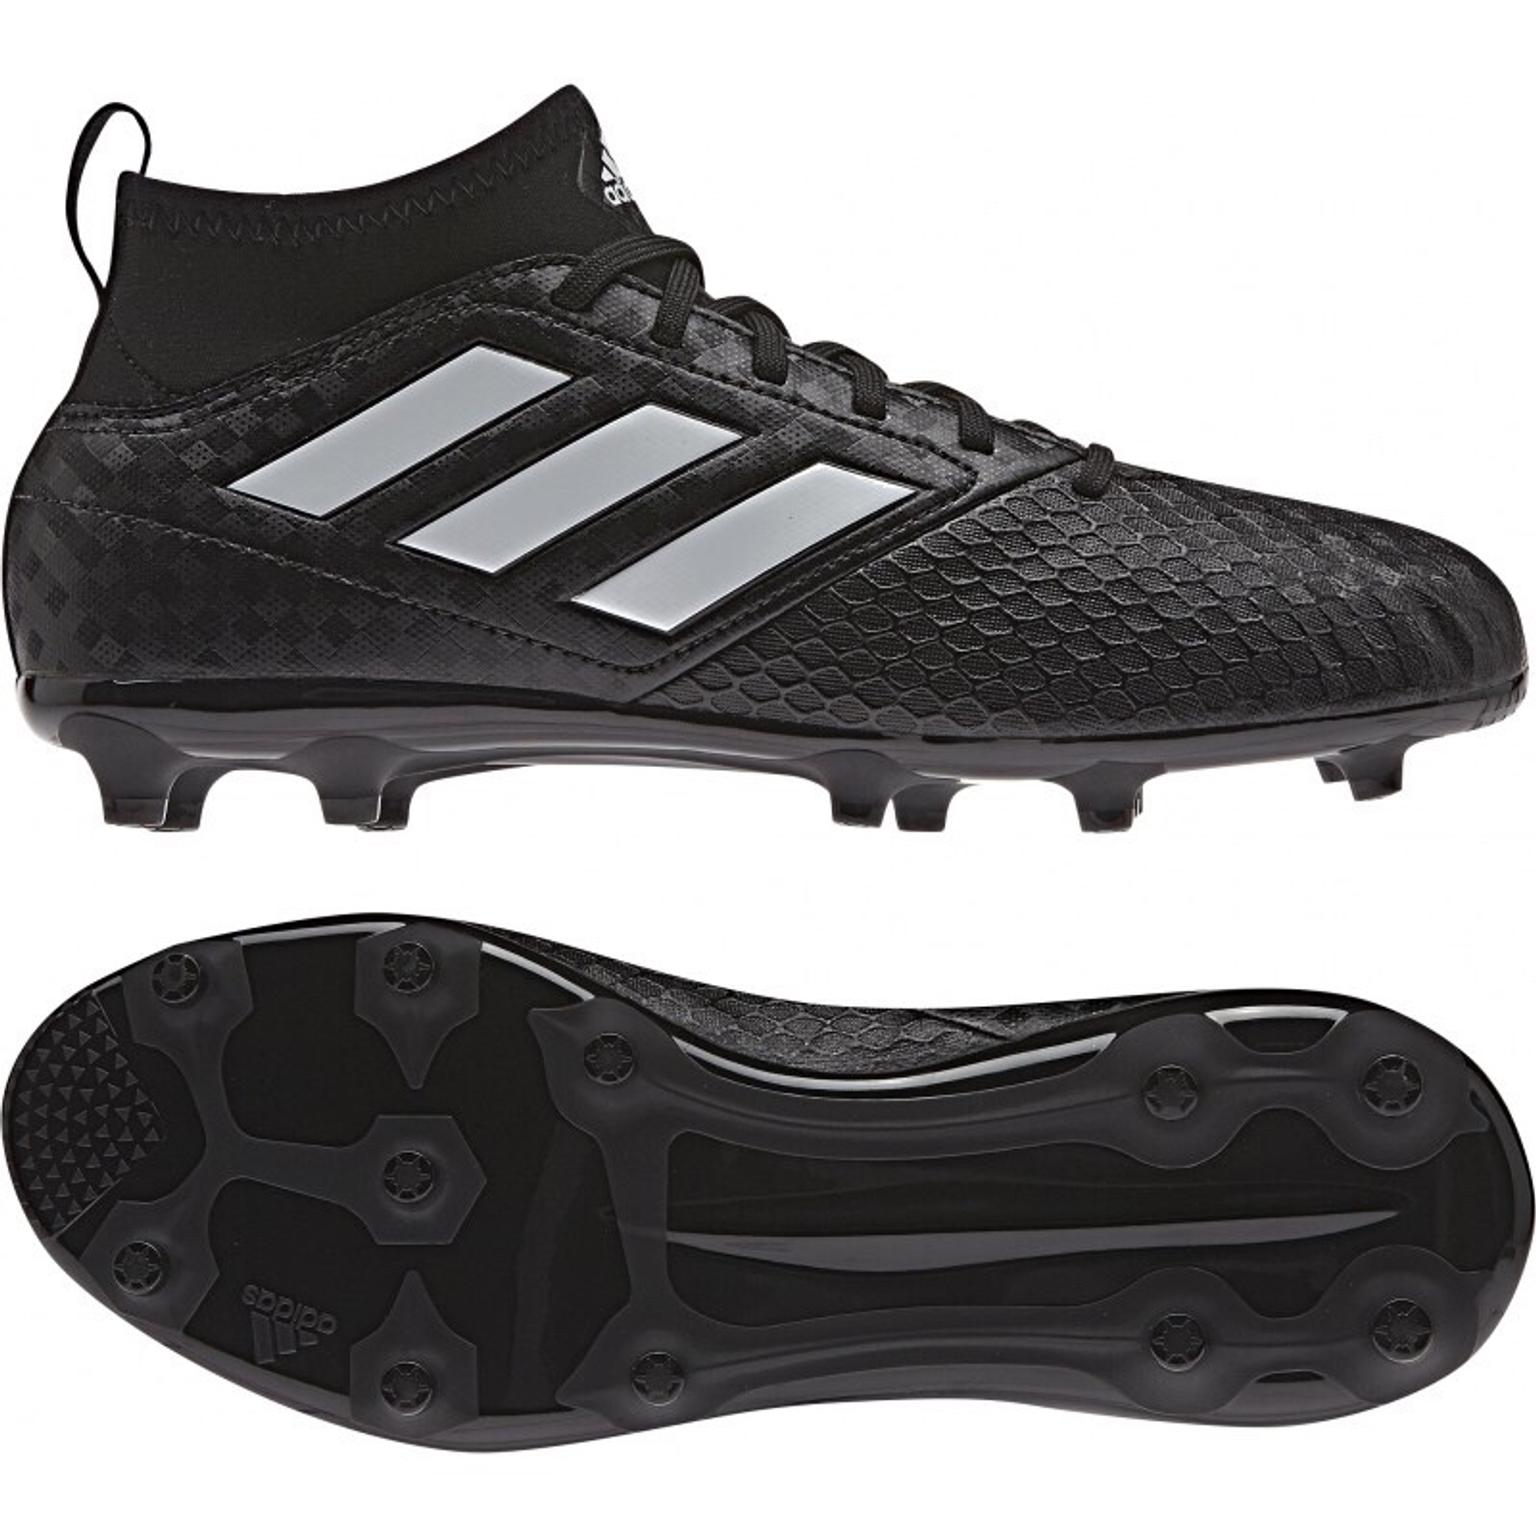 Adidas Ace 17.5 football boots in WA5 Sankey for £45.00 for sale | Shpock